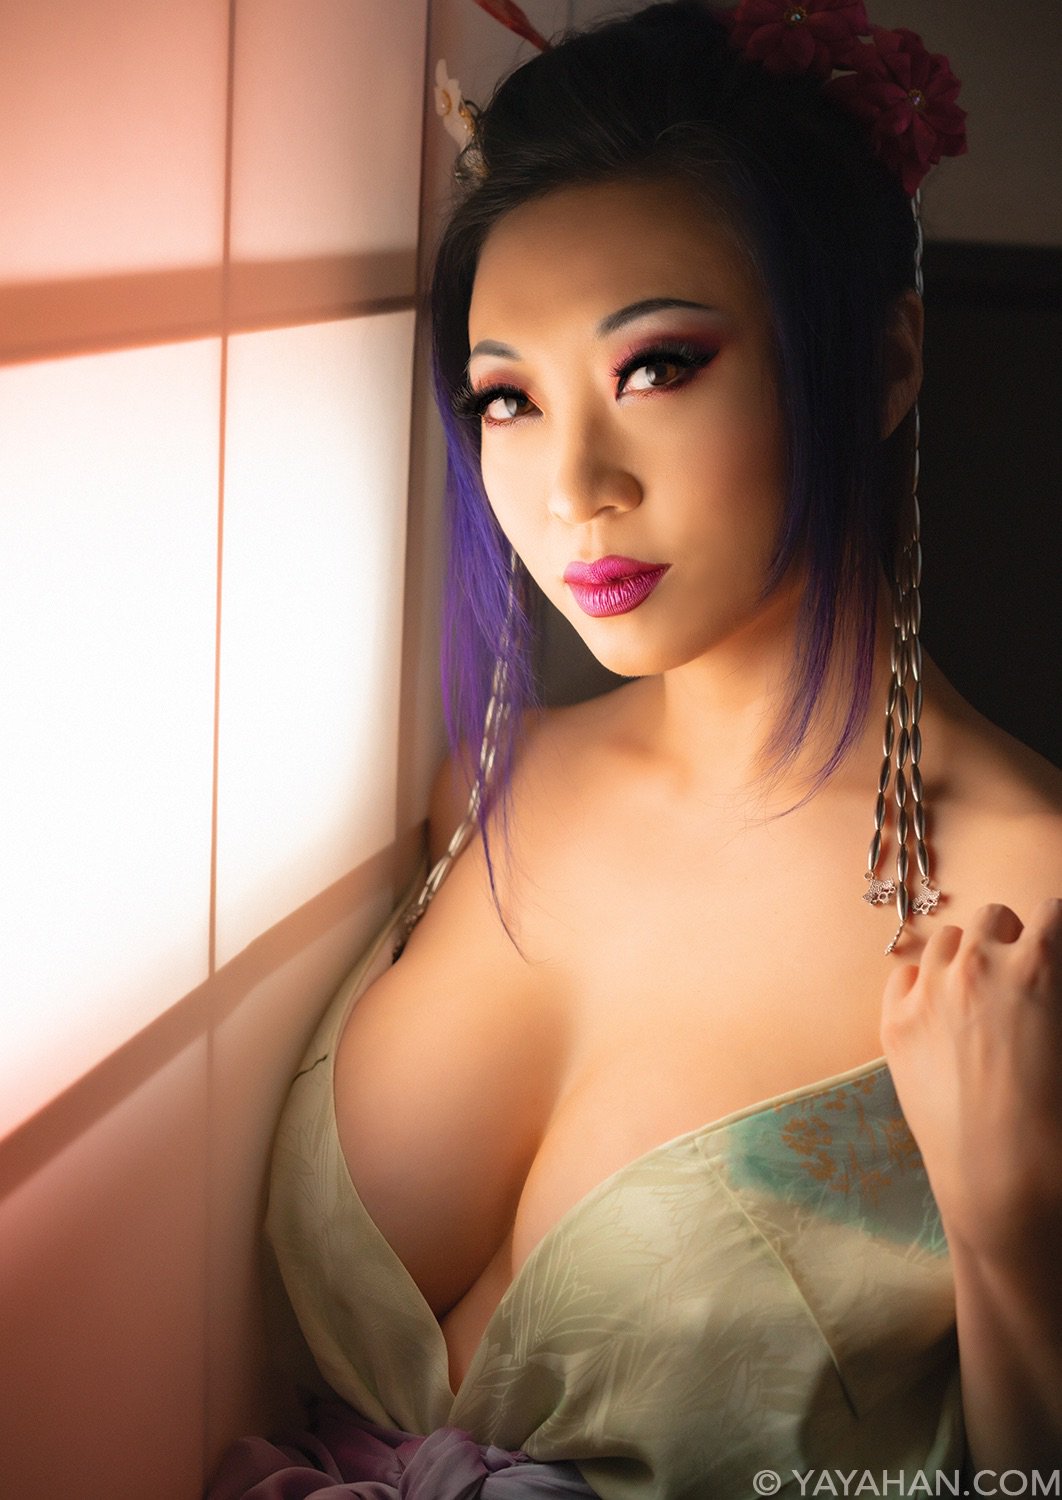 Yaya Han on X: I just added 4 new printsposters of my latest  geisha-inspired photoshoot to my shop! 🌸 t.coq0WV3VmSMM 8x12 or  11x17 size, hand signed, global shipping. Thank you for your